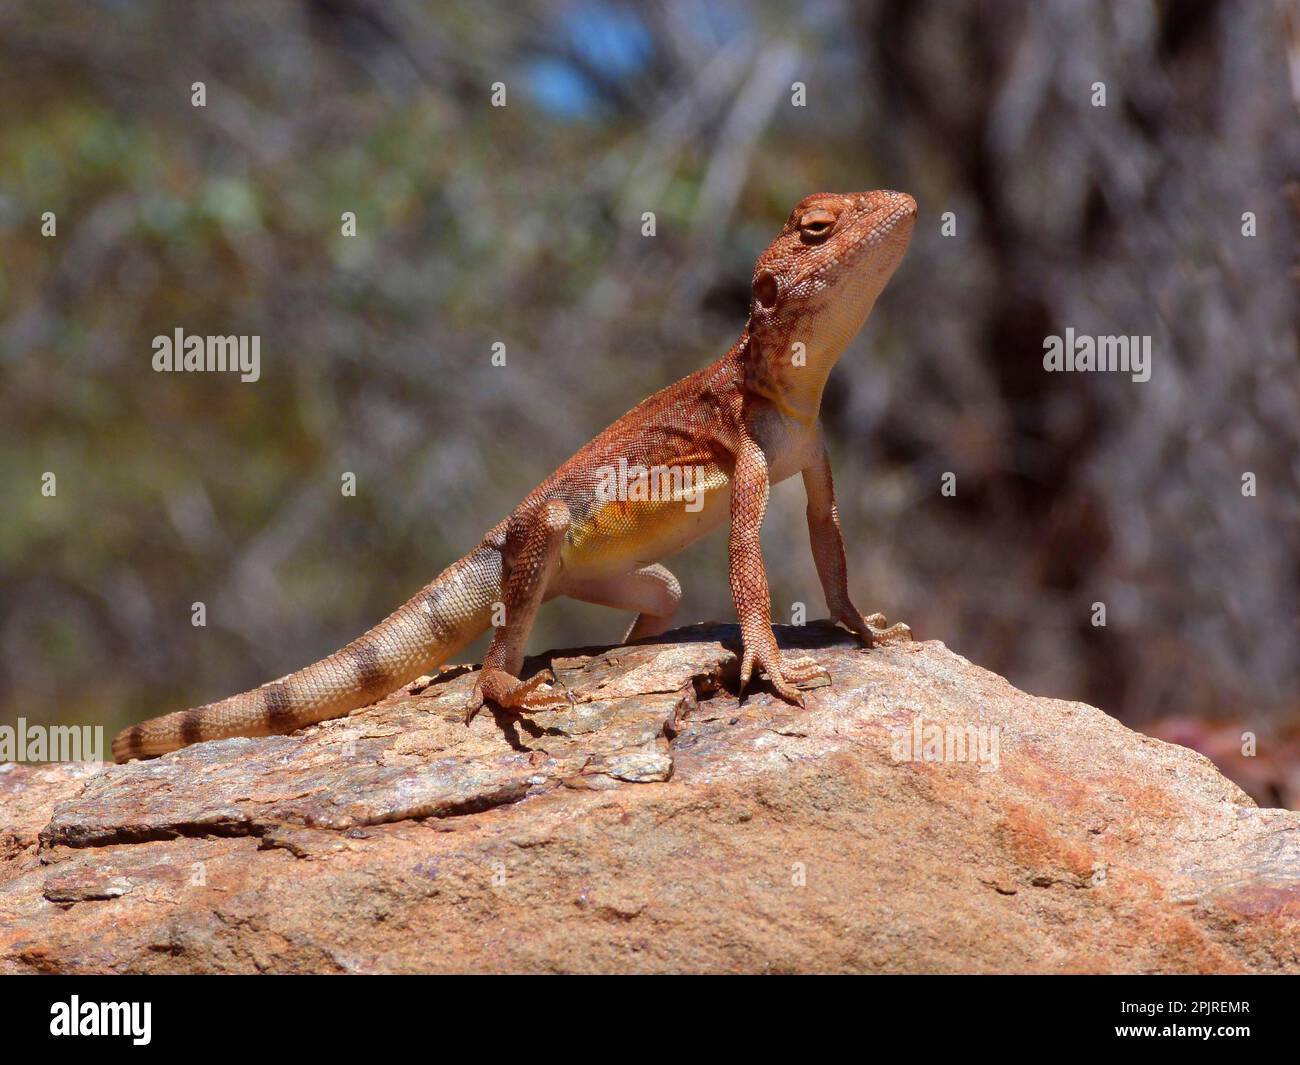 Pebble Dragon (Tympanocryptis cephalus) adult male, standing on rock with hind foot raised to keep cool, Western Australia, Australia Stock Photo